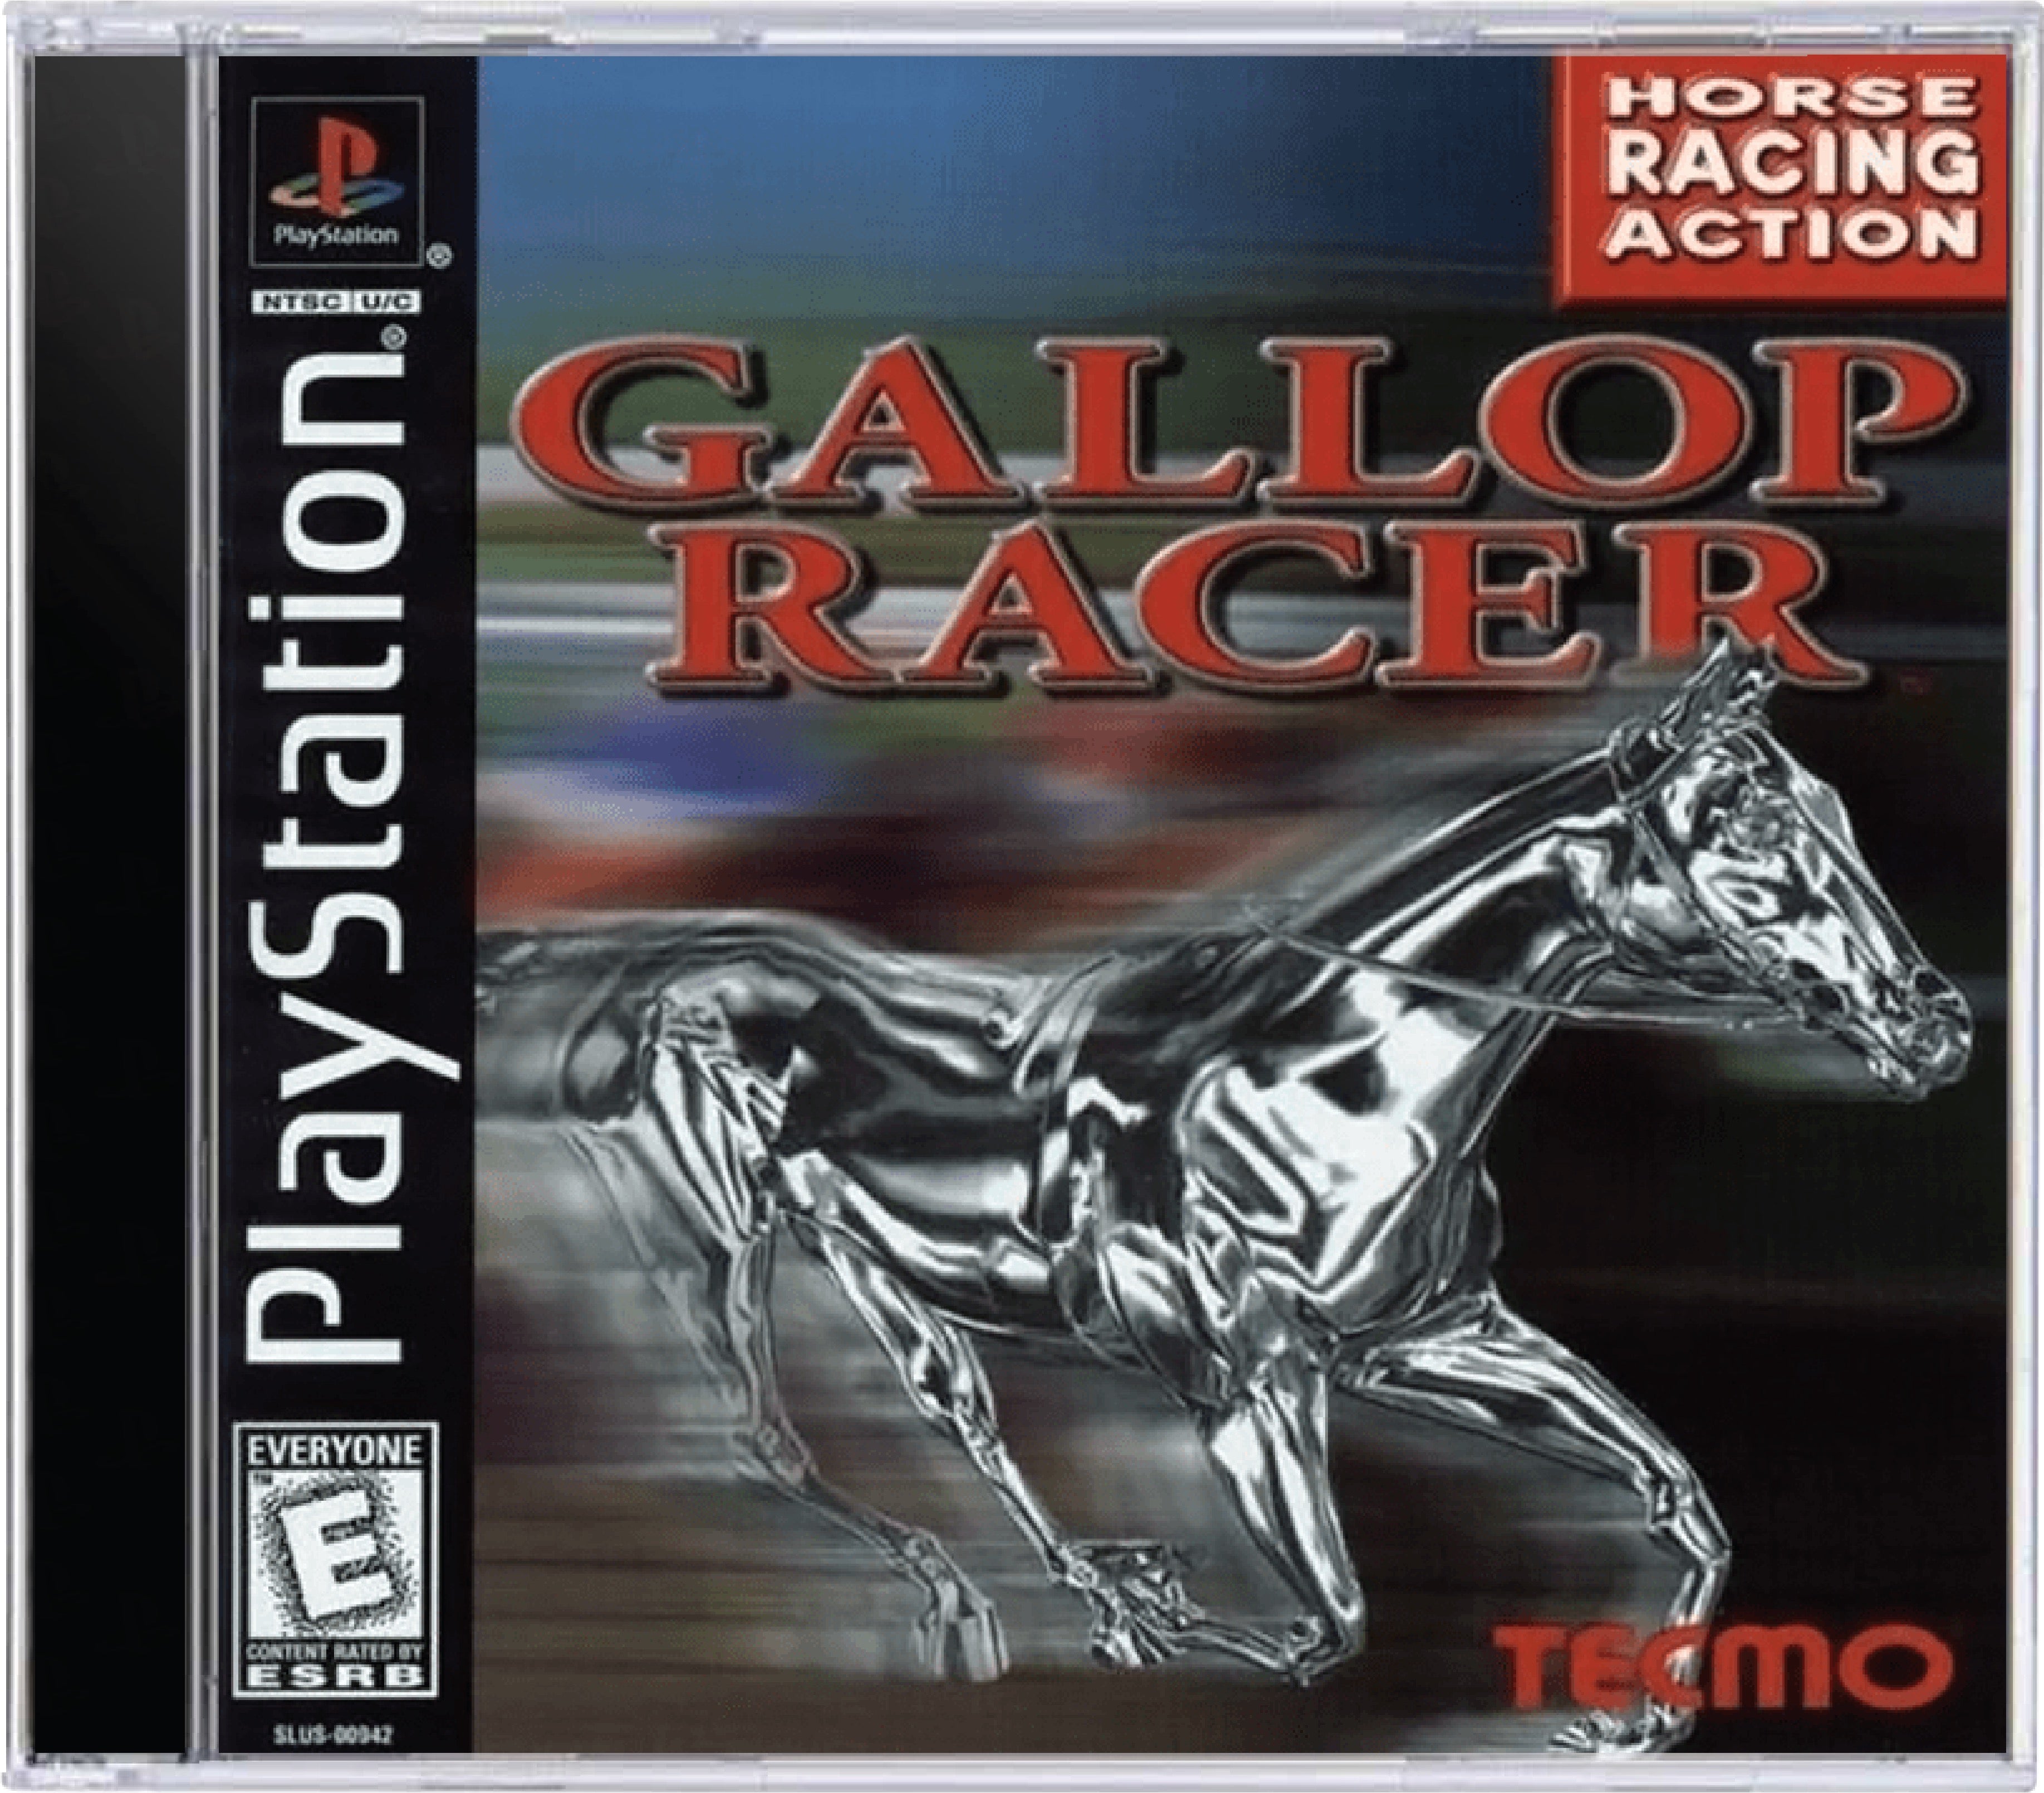 Gallop Racer Cover Art and Product Photo